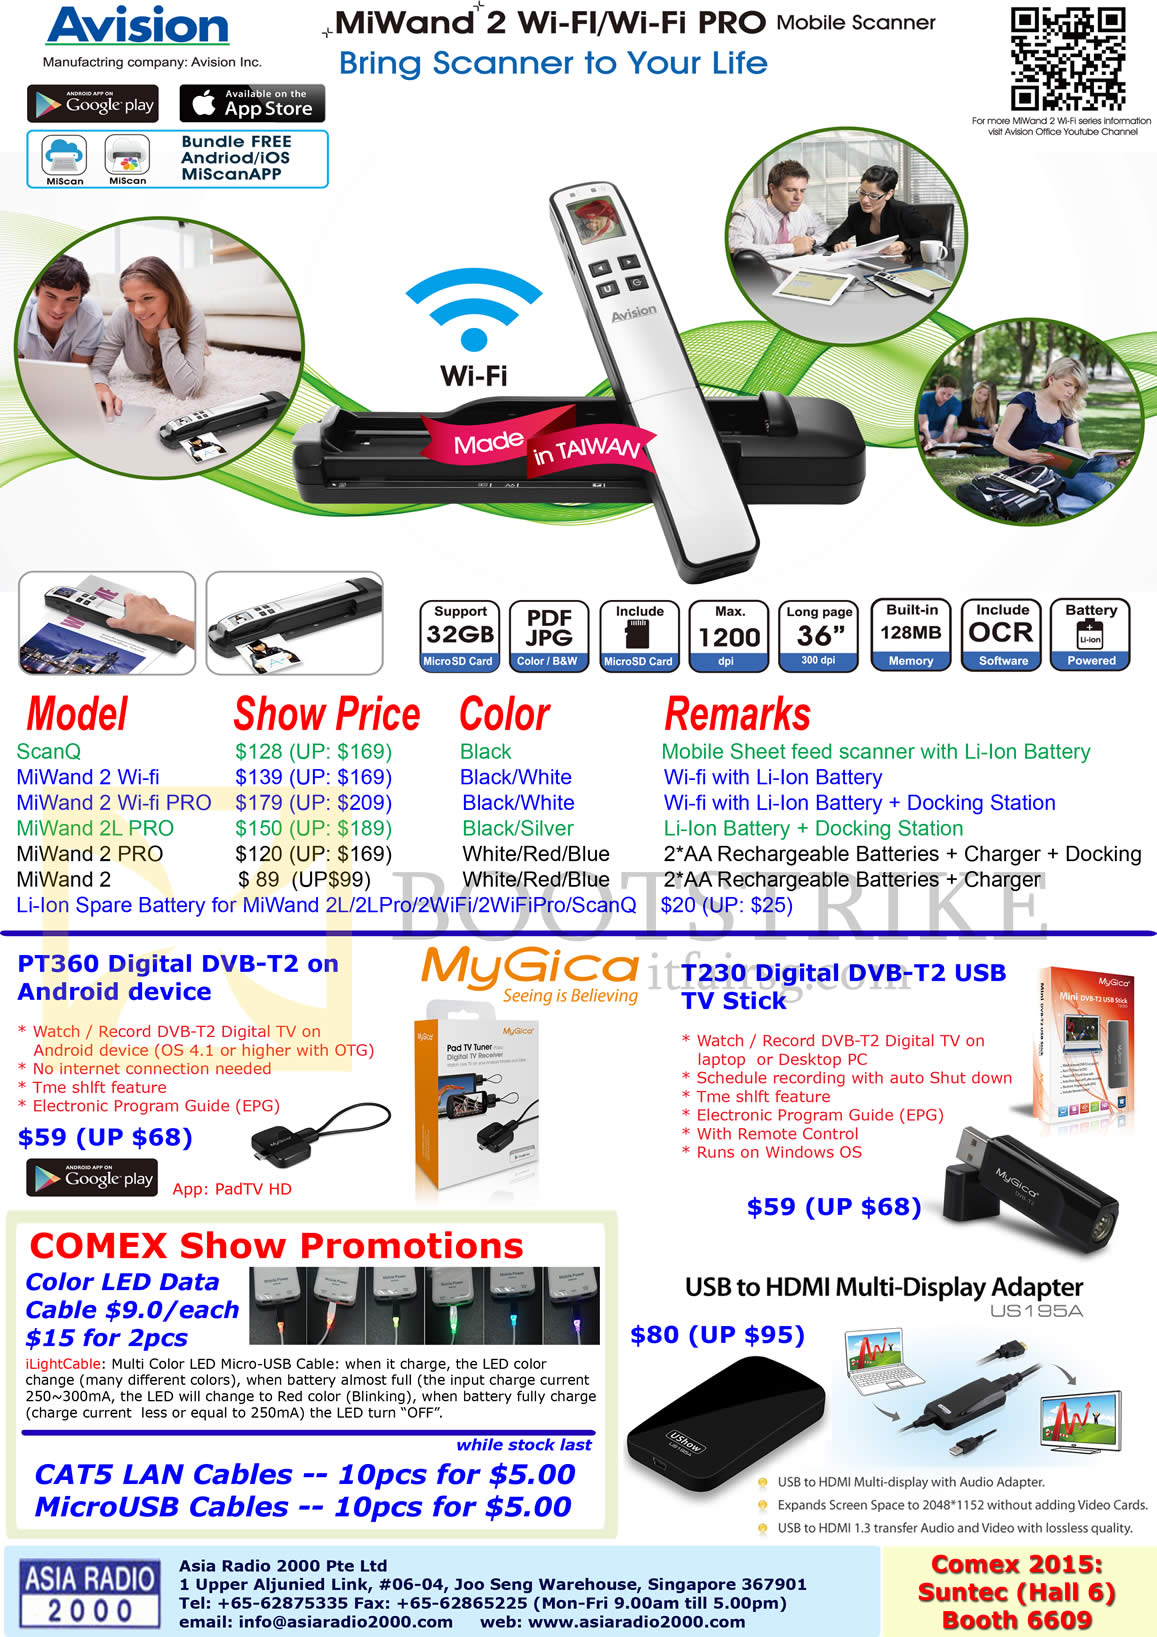 COMEX 2015 price list image brochure of Asia Radio 2000 Mobile Scanner, TV Stick, USB To HDMI Multi-Display Adapter, PT360 Digital DVB-T2 Android Device